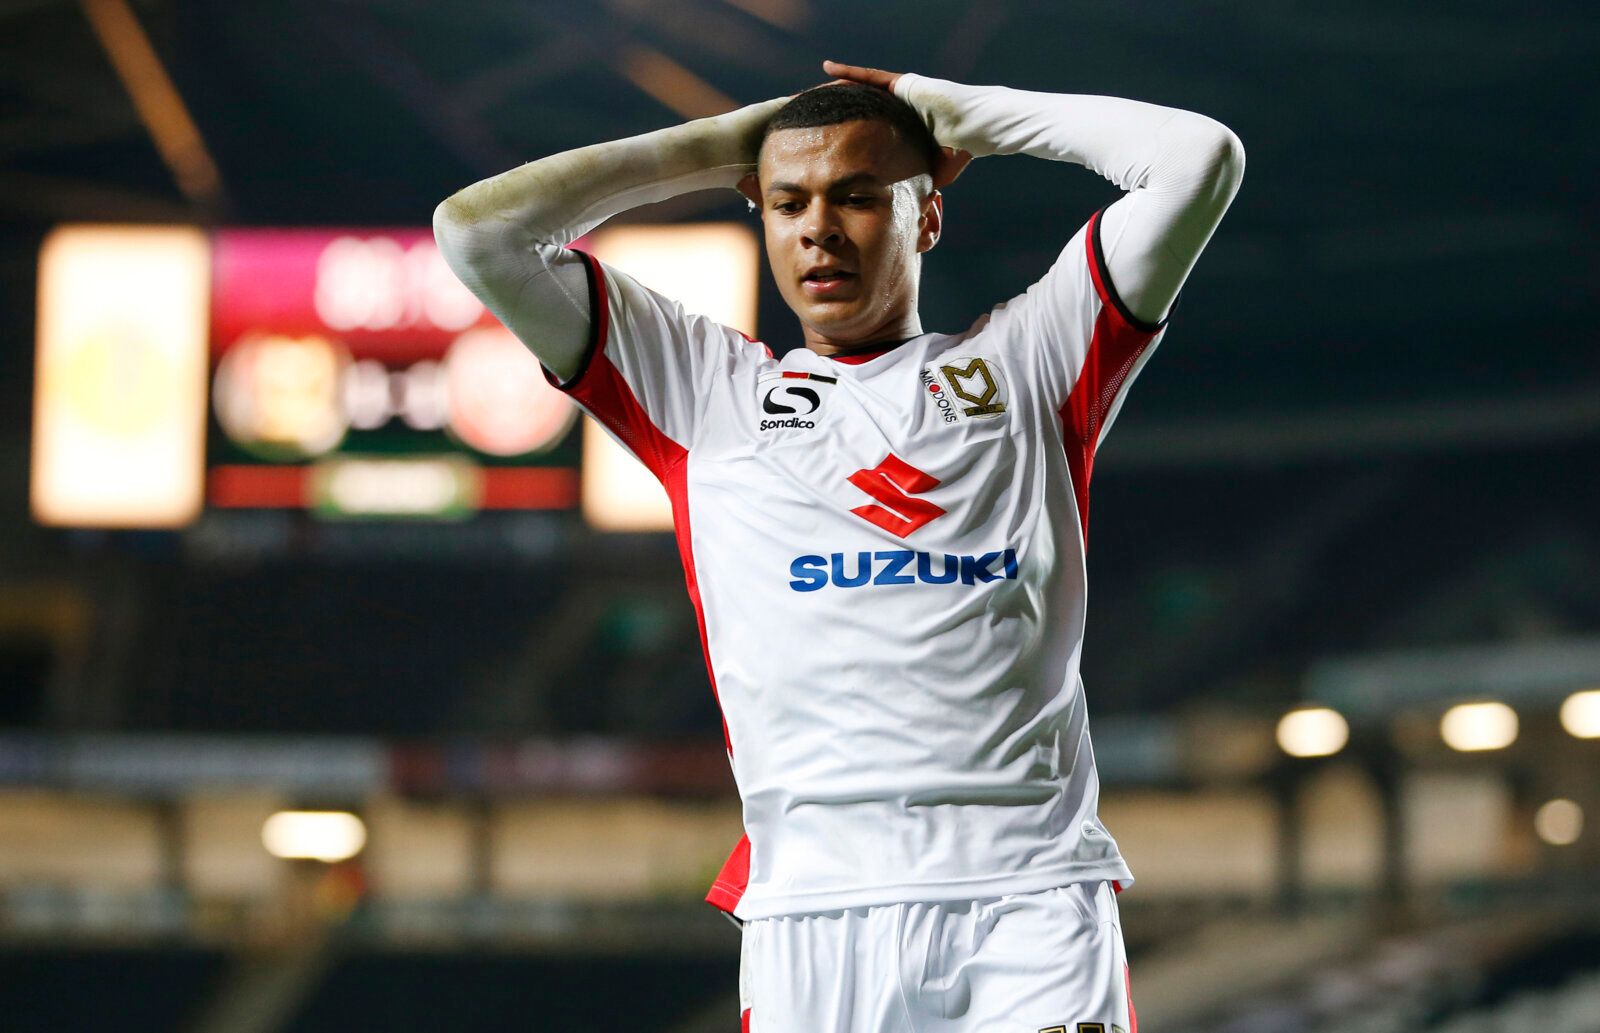 Football - Milton Keynes Dons v Sheffield United - Capital One Cup Fourth Round - Stadium MK - 28/10/14 
Milton Keynes Dons' Dele Alli looks dejected after a missed chance 
Mandatory Credit: Action Images / John Sibley 
Livepic 
EDITORIAL USE ONLY. No use with unauthorized audio, video, data, fixture lists, club/league logos or 